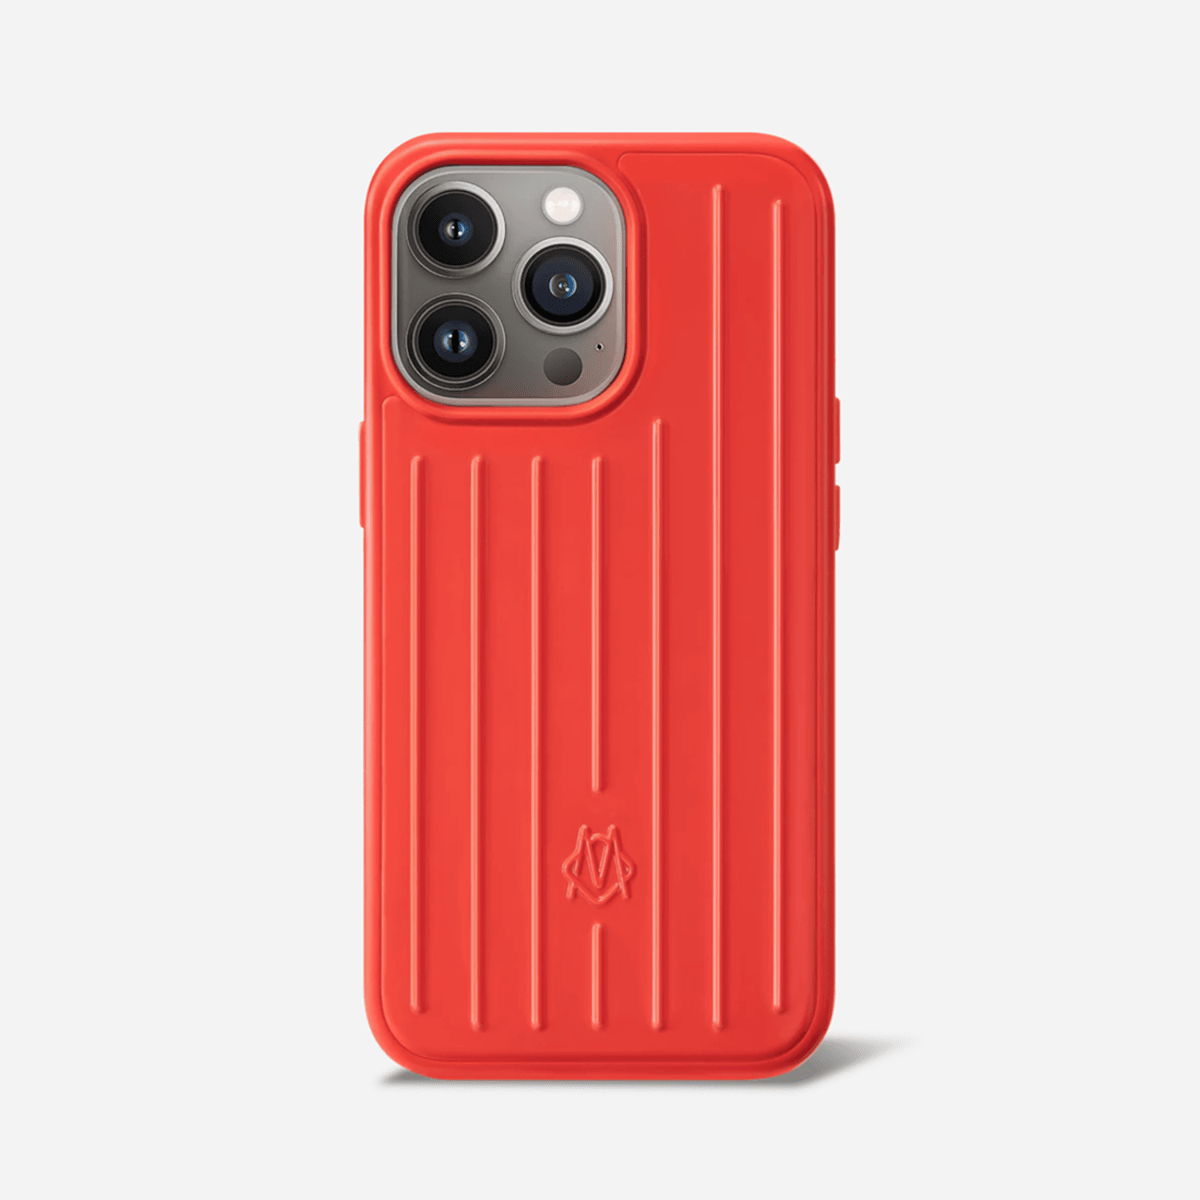 RIMOWA Launches iPhone 13 Pro Case in Flamingo Red - Airows